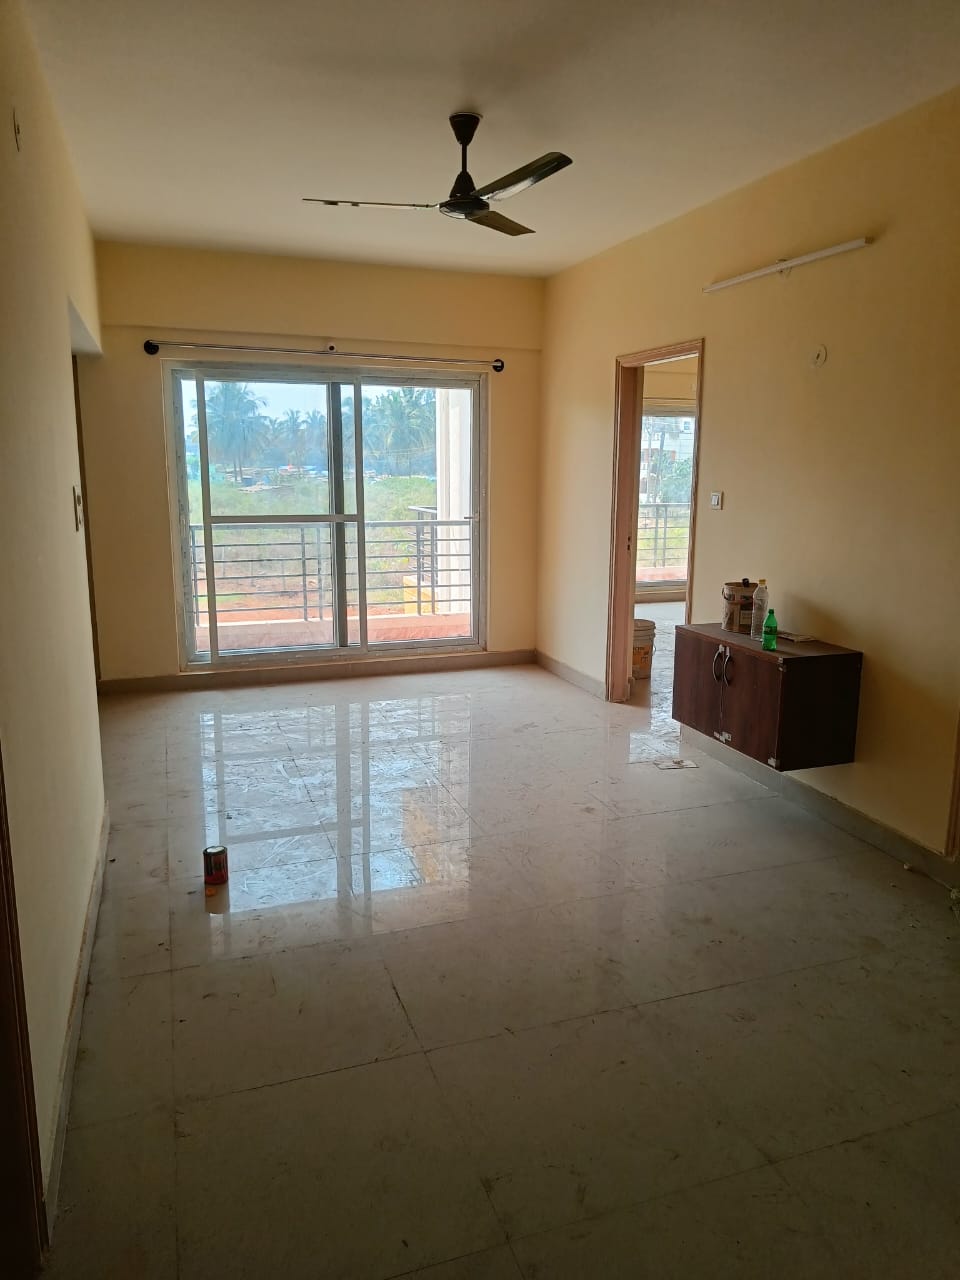 2 BHK Residential Apartment for Lease Only at JAML2 - 2724 in Hoysala Nagar